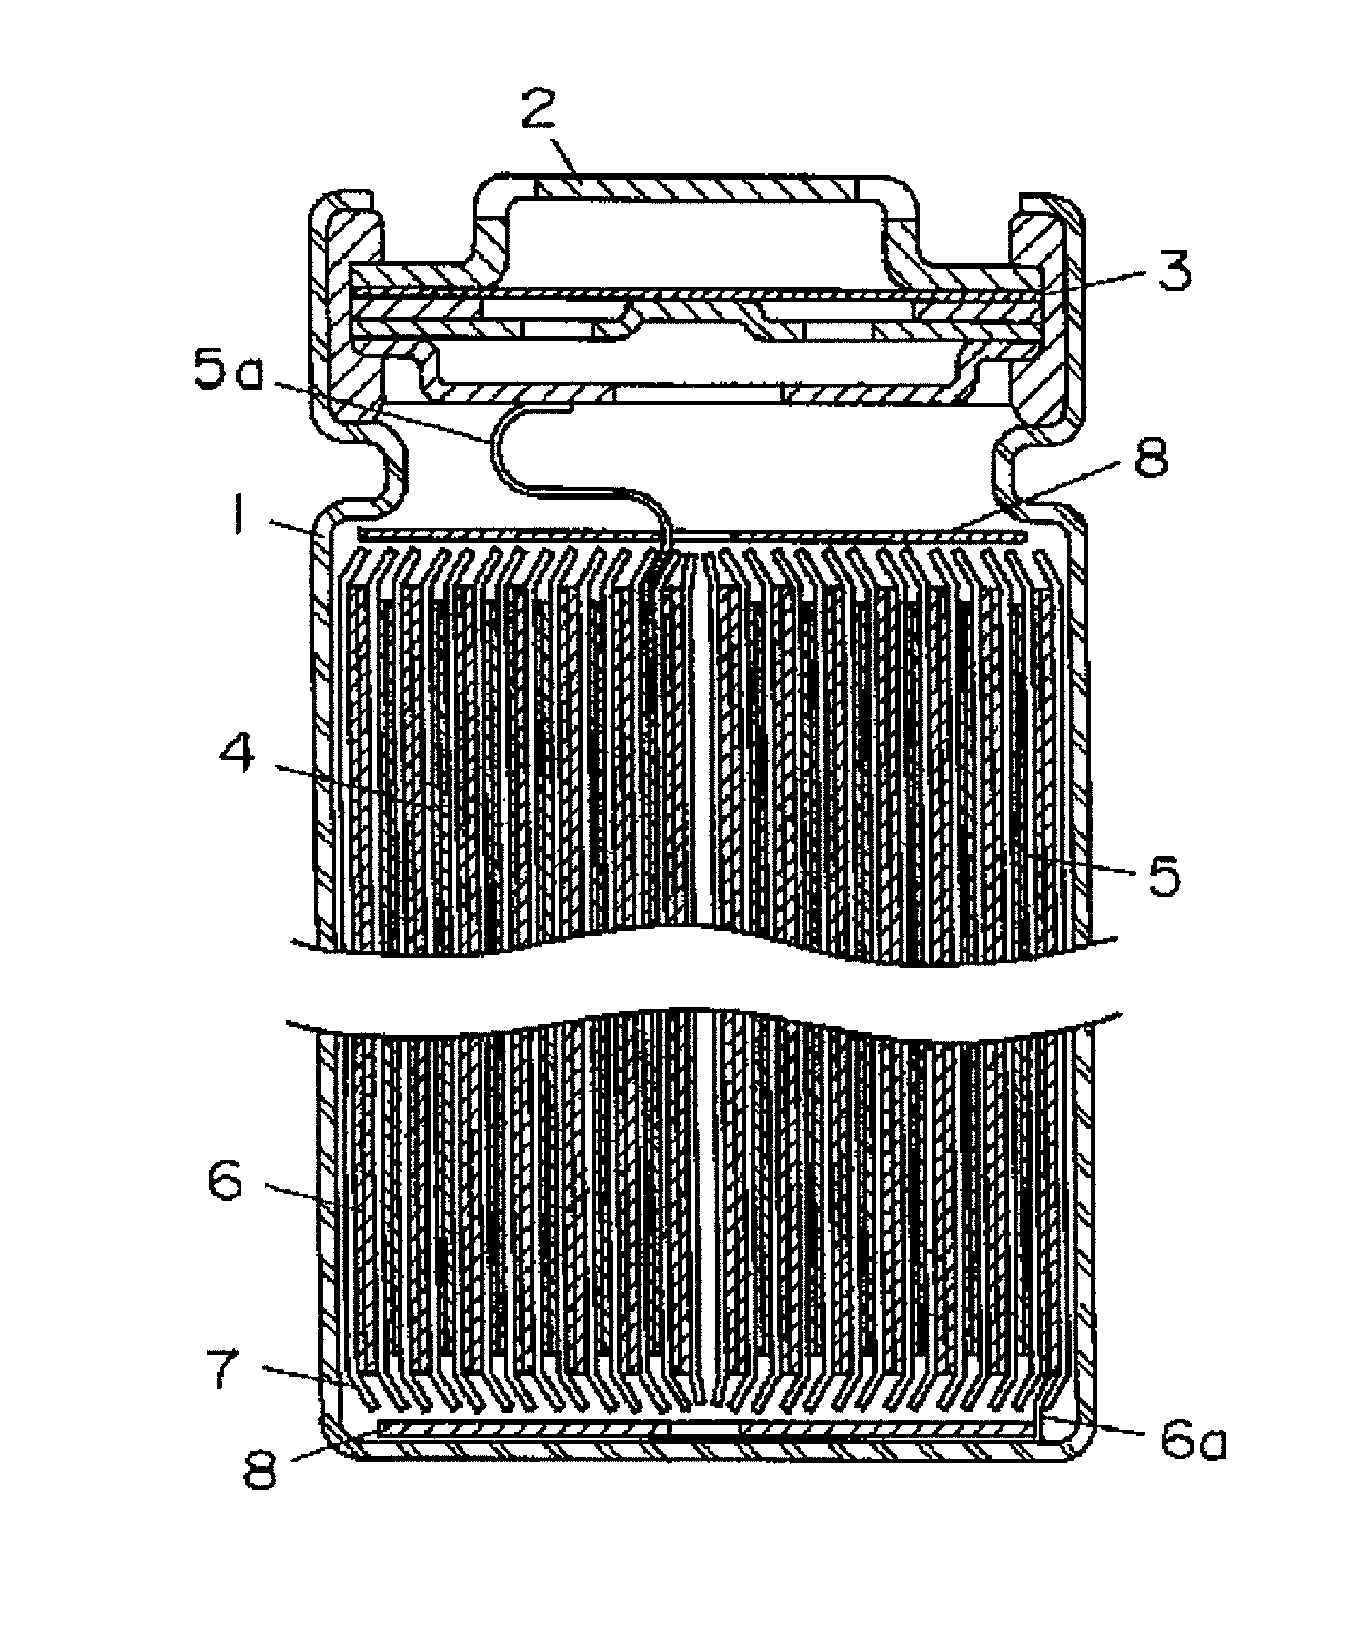 Method for charging and discharging lithium secondary battery, and system for charging and discharging lithium secondary battery